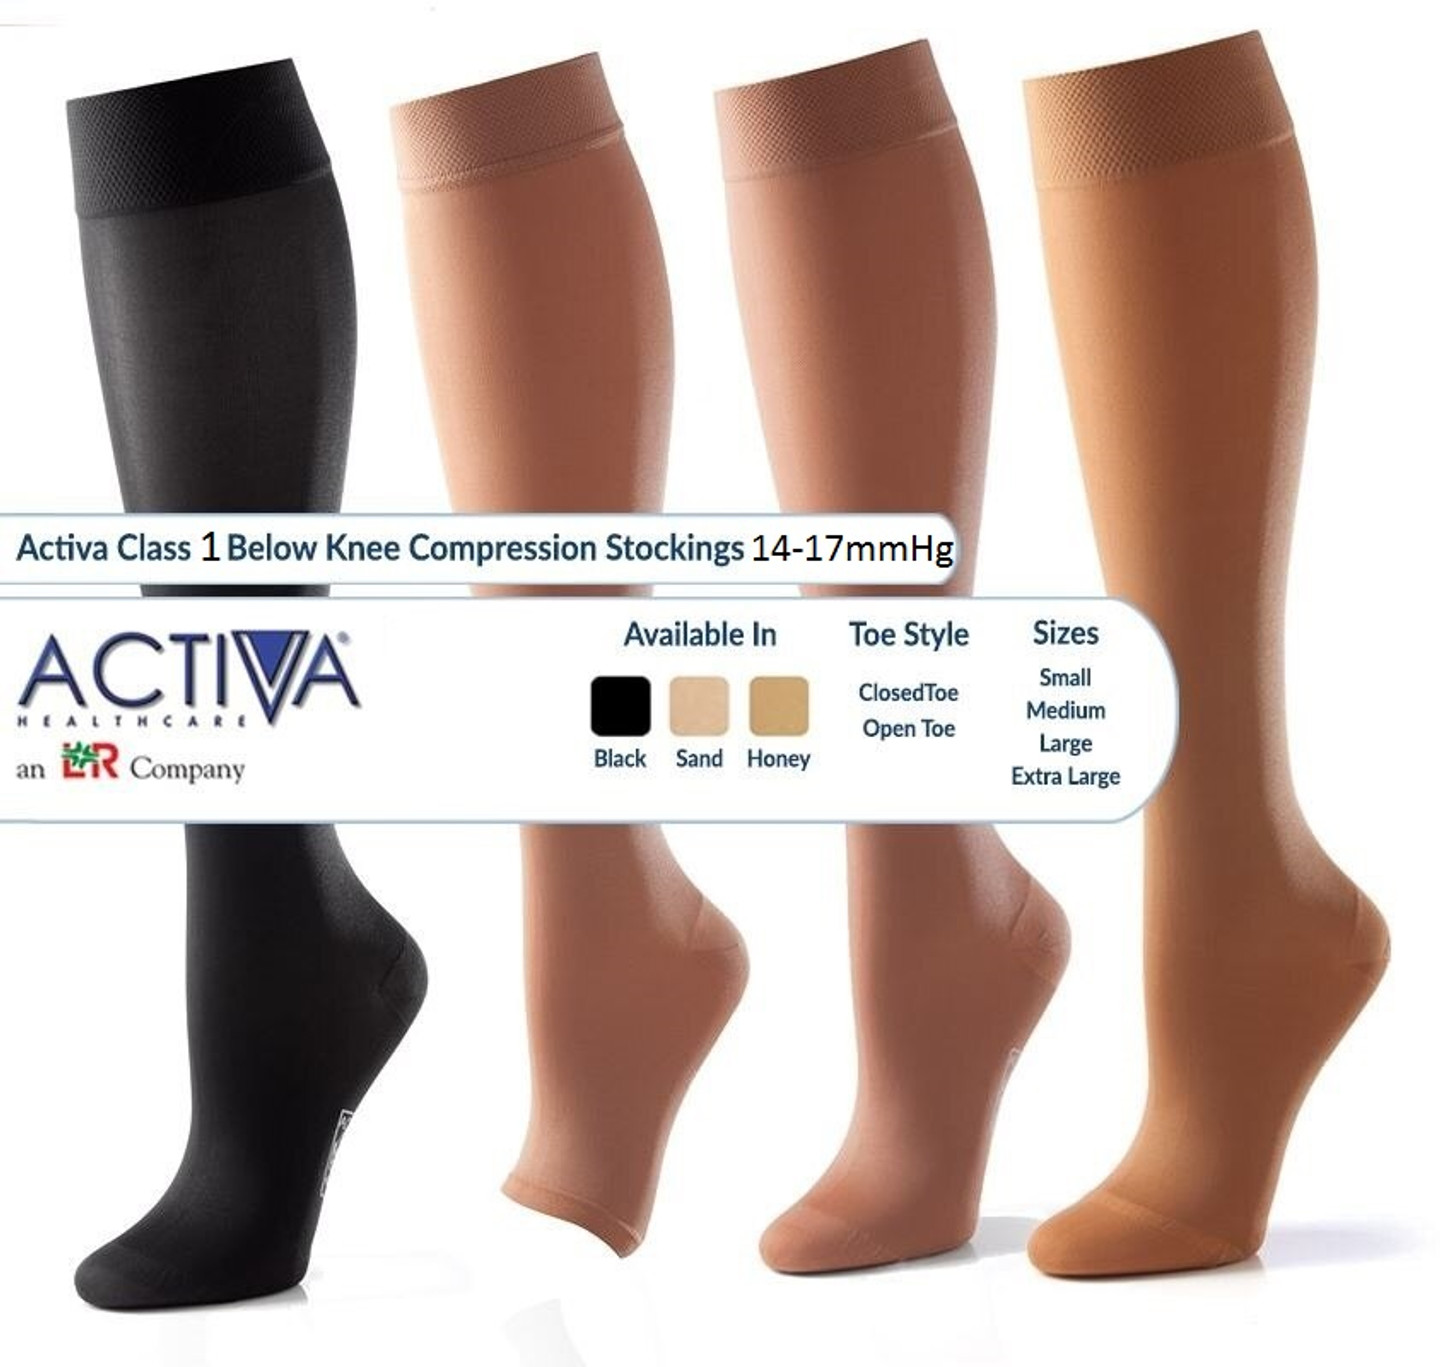 Activa CLASS 1 Below Knee Compression Hoisery (14-17mmHg) - MedicalDressings